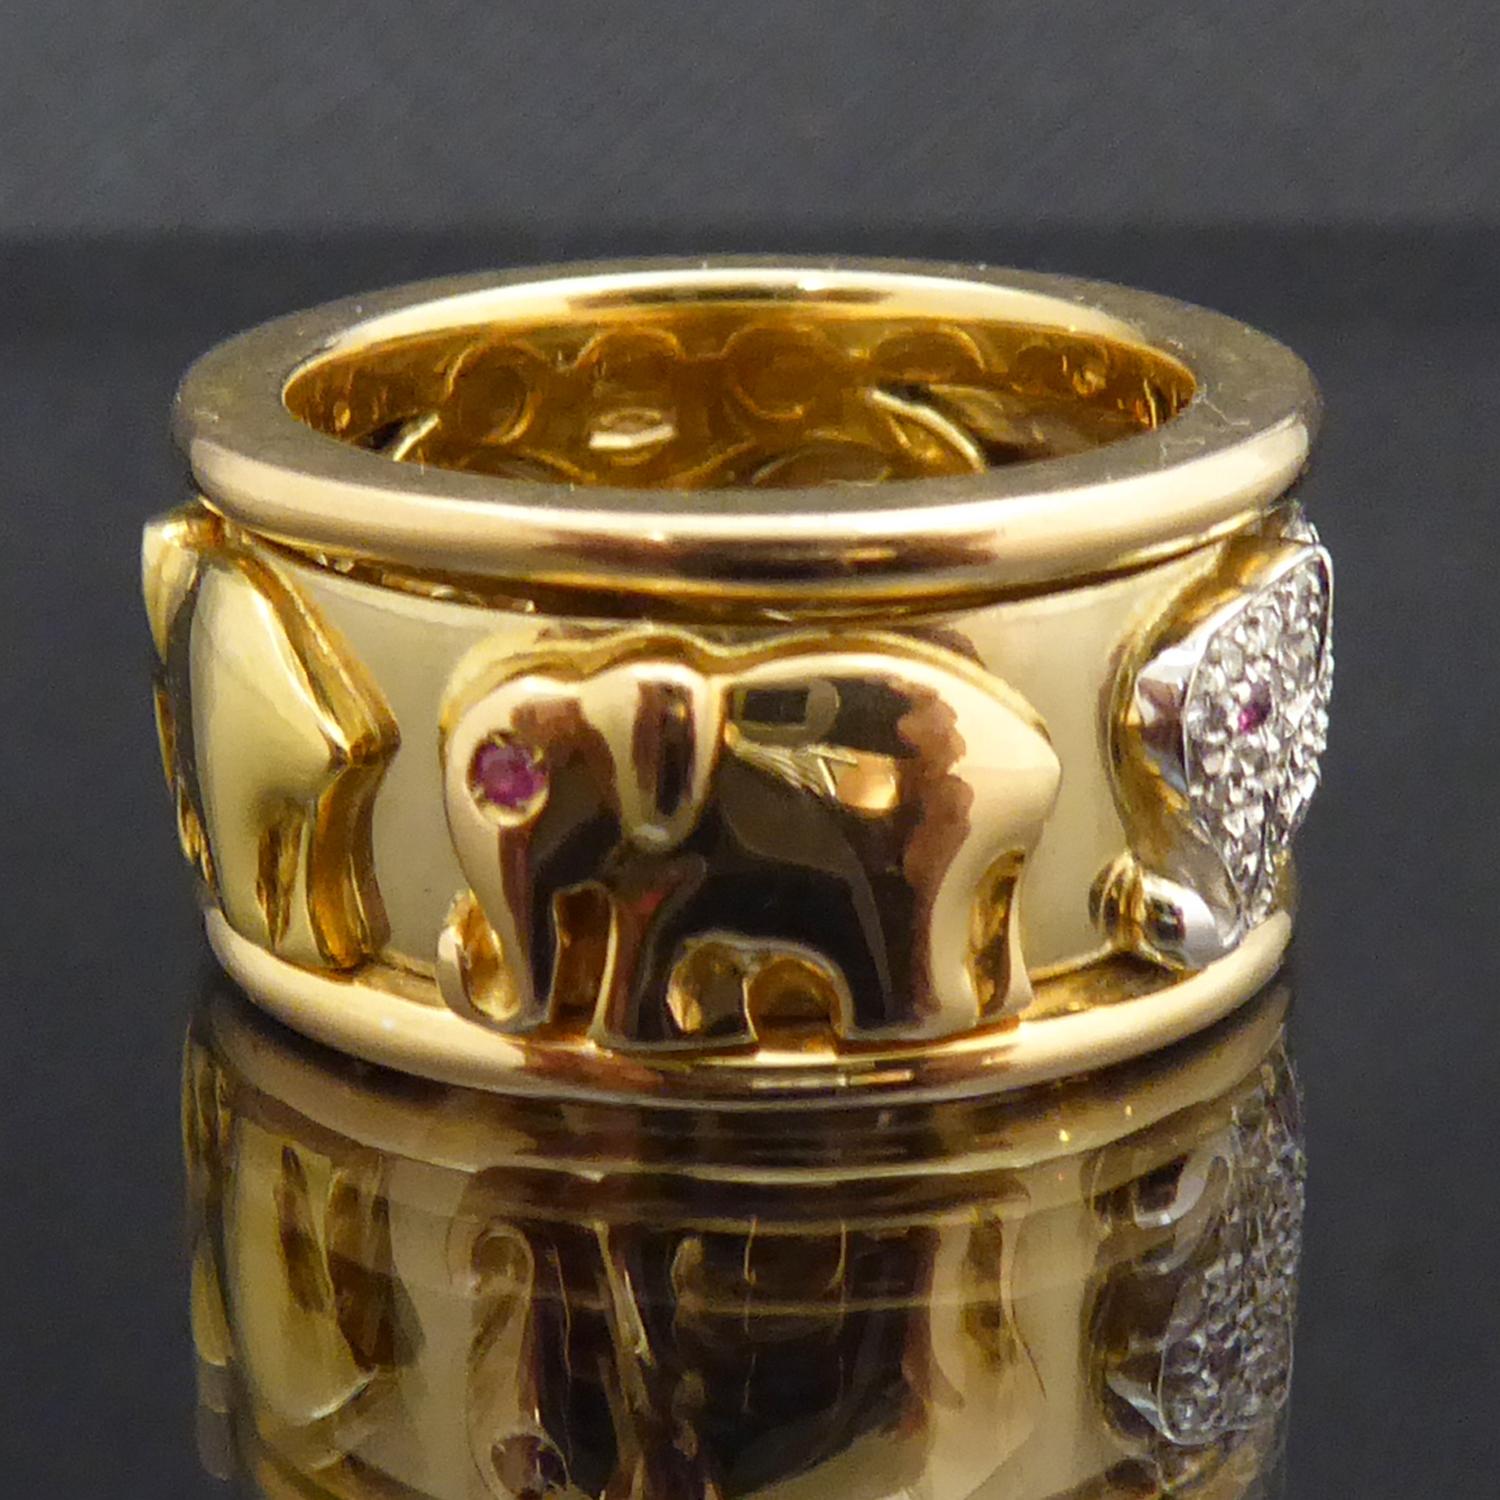 A thoroughly delightful gold band depicting a herd of elephants in their characteristic trunk-to-tail elephant walk.  The ring features five gold elephants, each set with a ruby eye walking around the centre of the gold band.  One of the elephants,